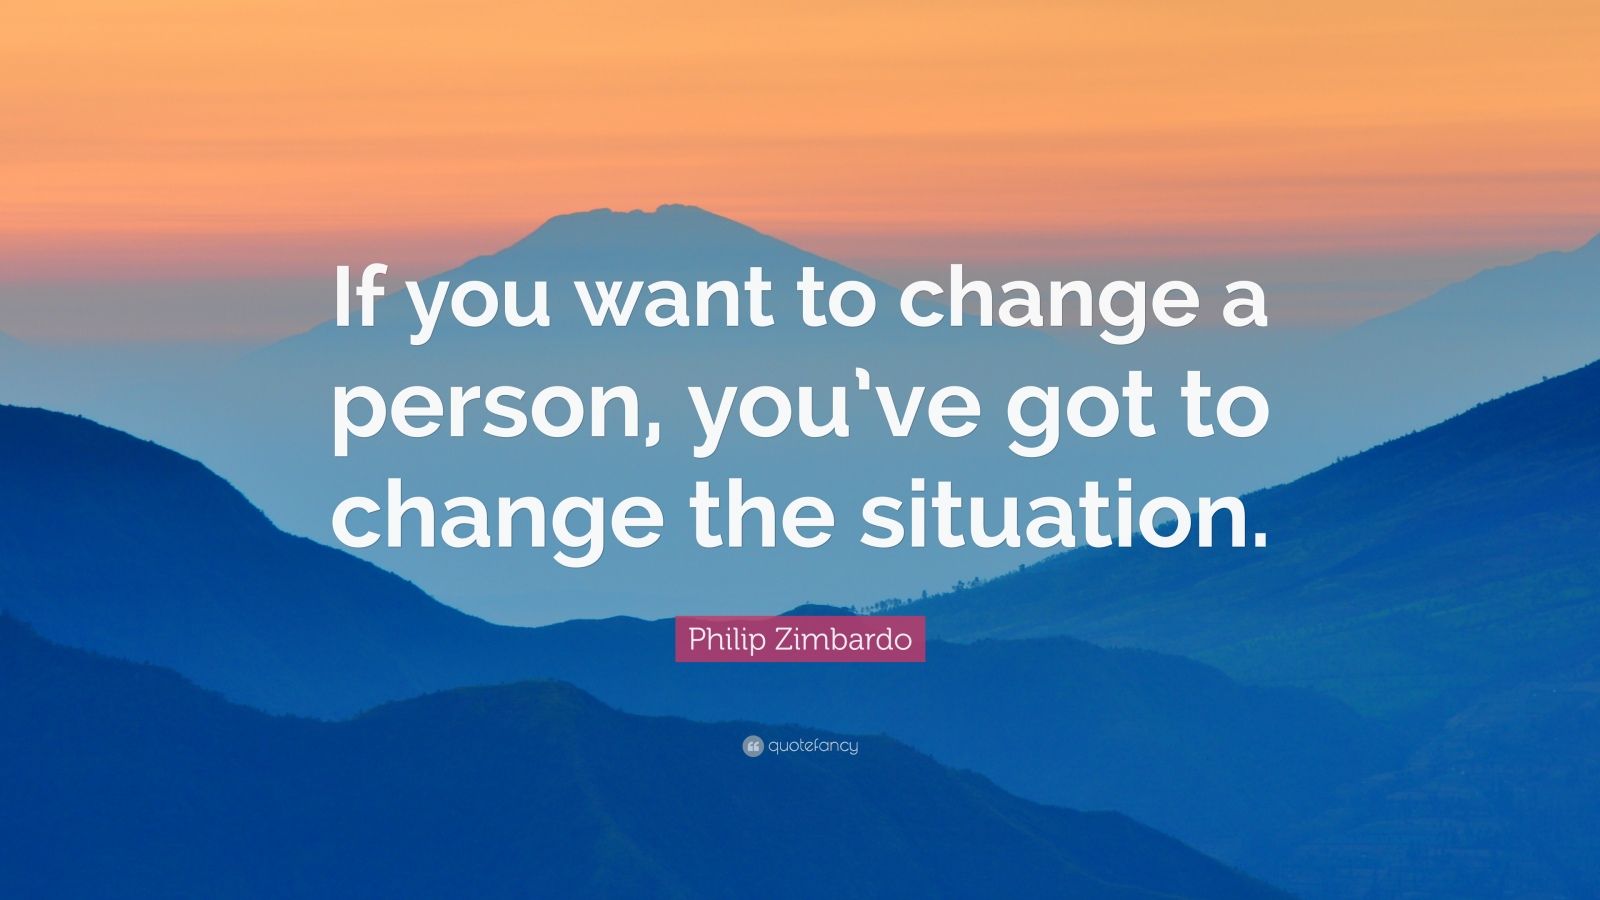 Philip Zimbardo Quote: “If you want to change a person, you’ve got to ...